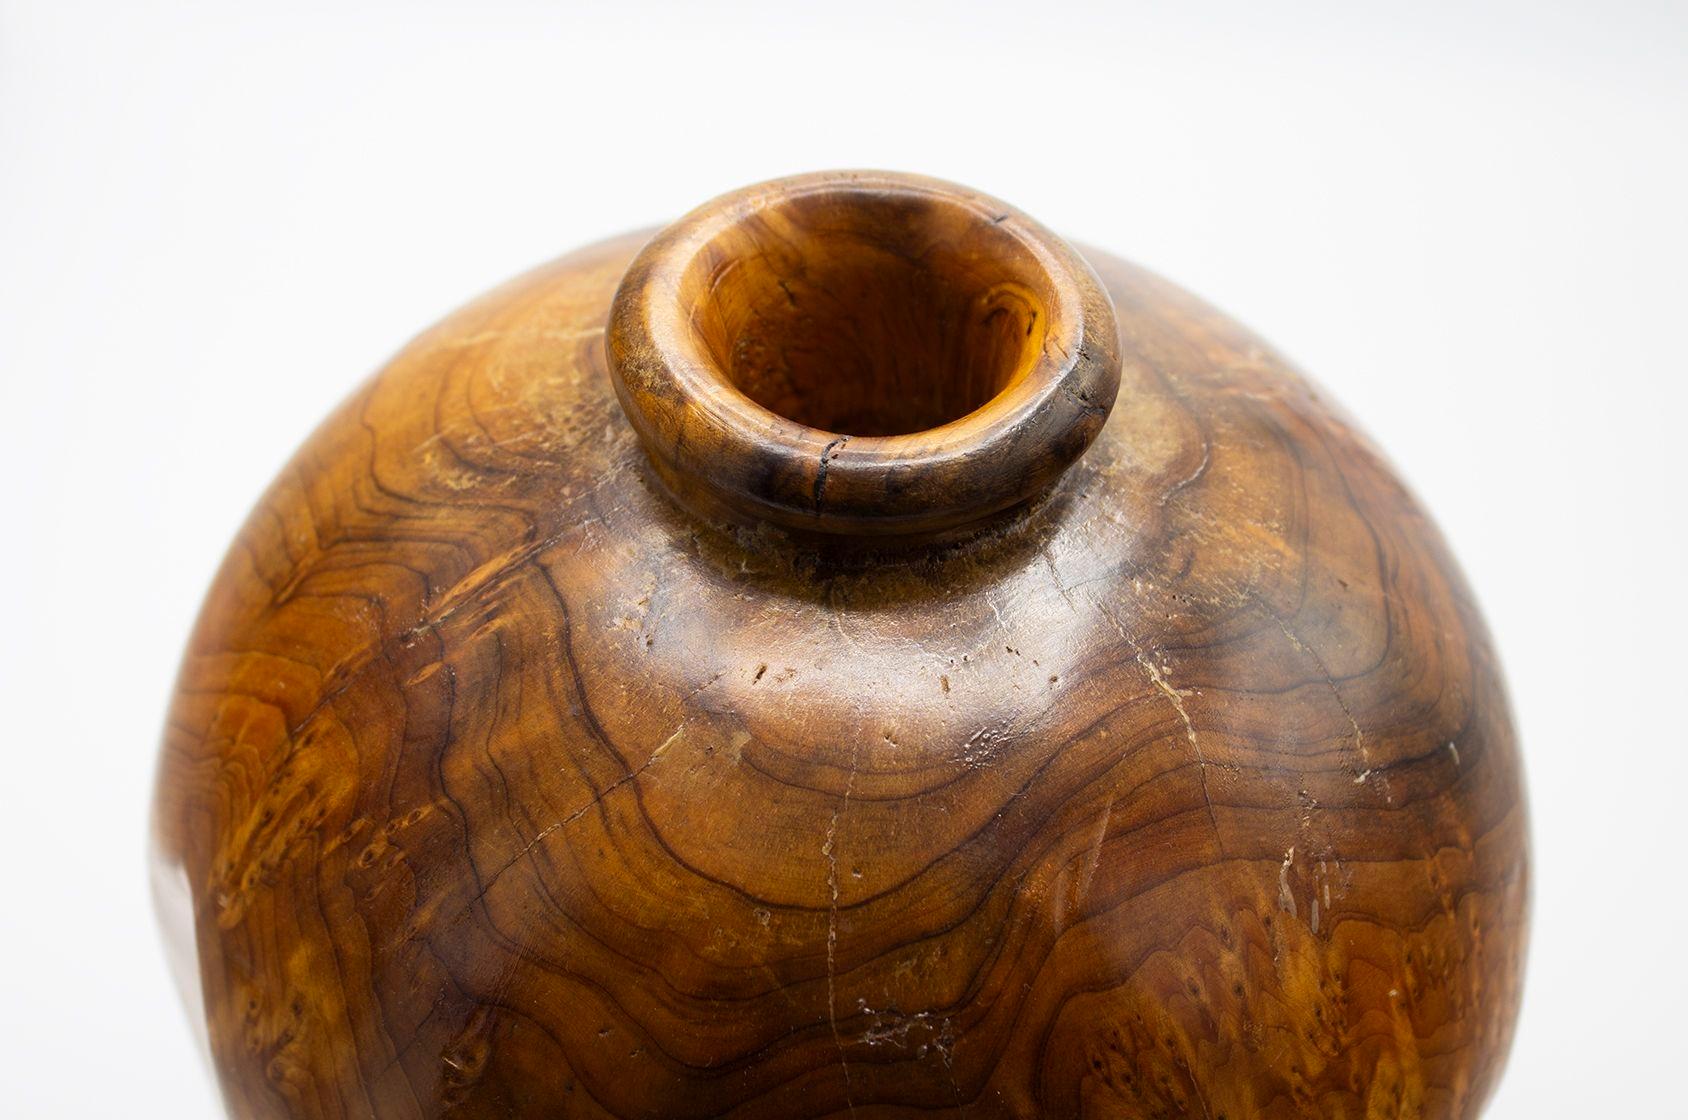 Burl Wood Vessel or Vase in Chinese Fir In Good Condition For Sale In Grand Rapids, MI